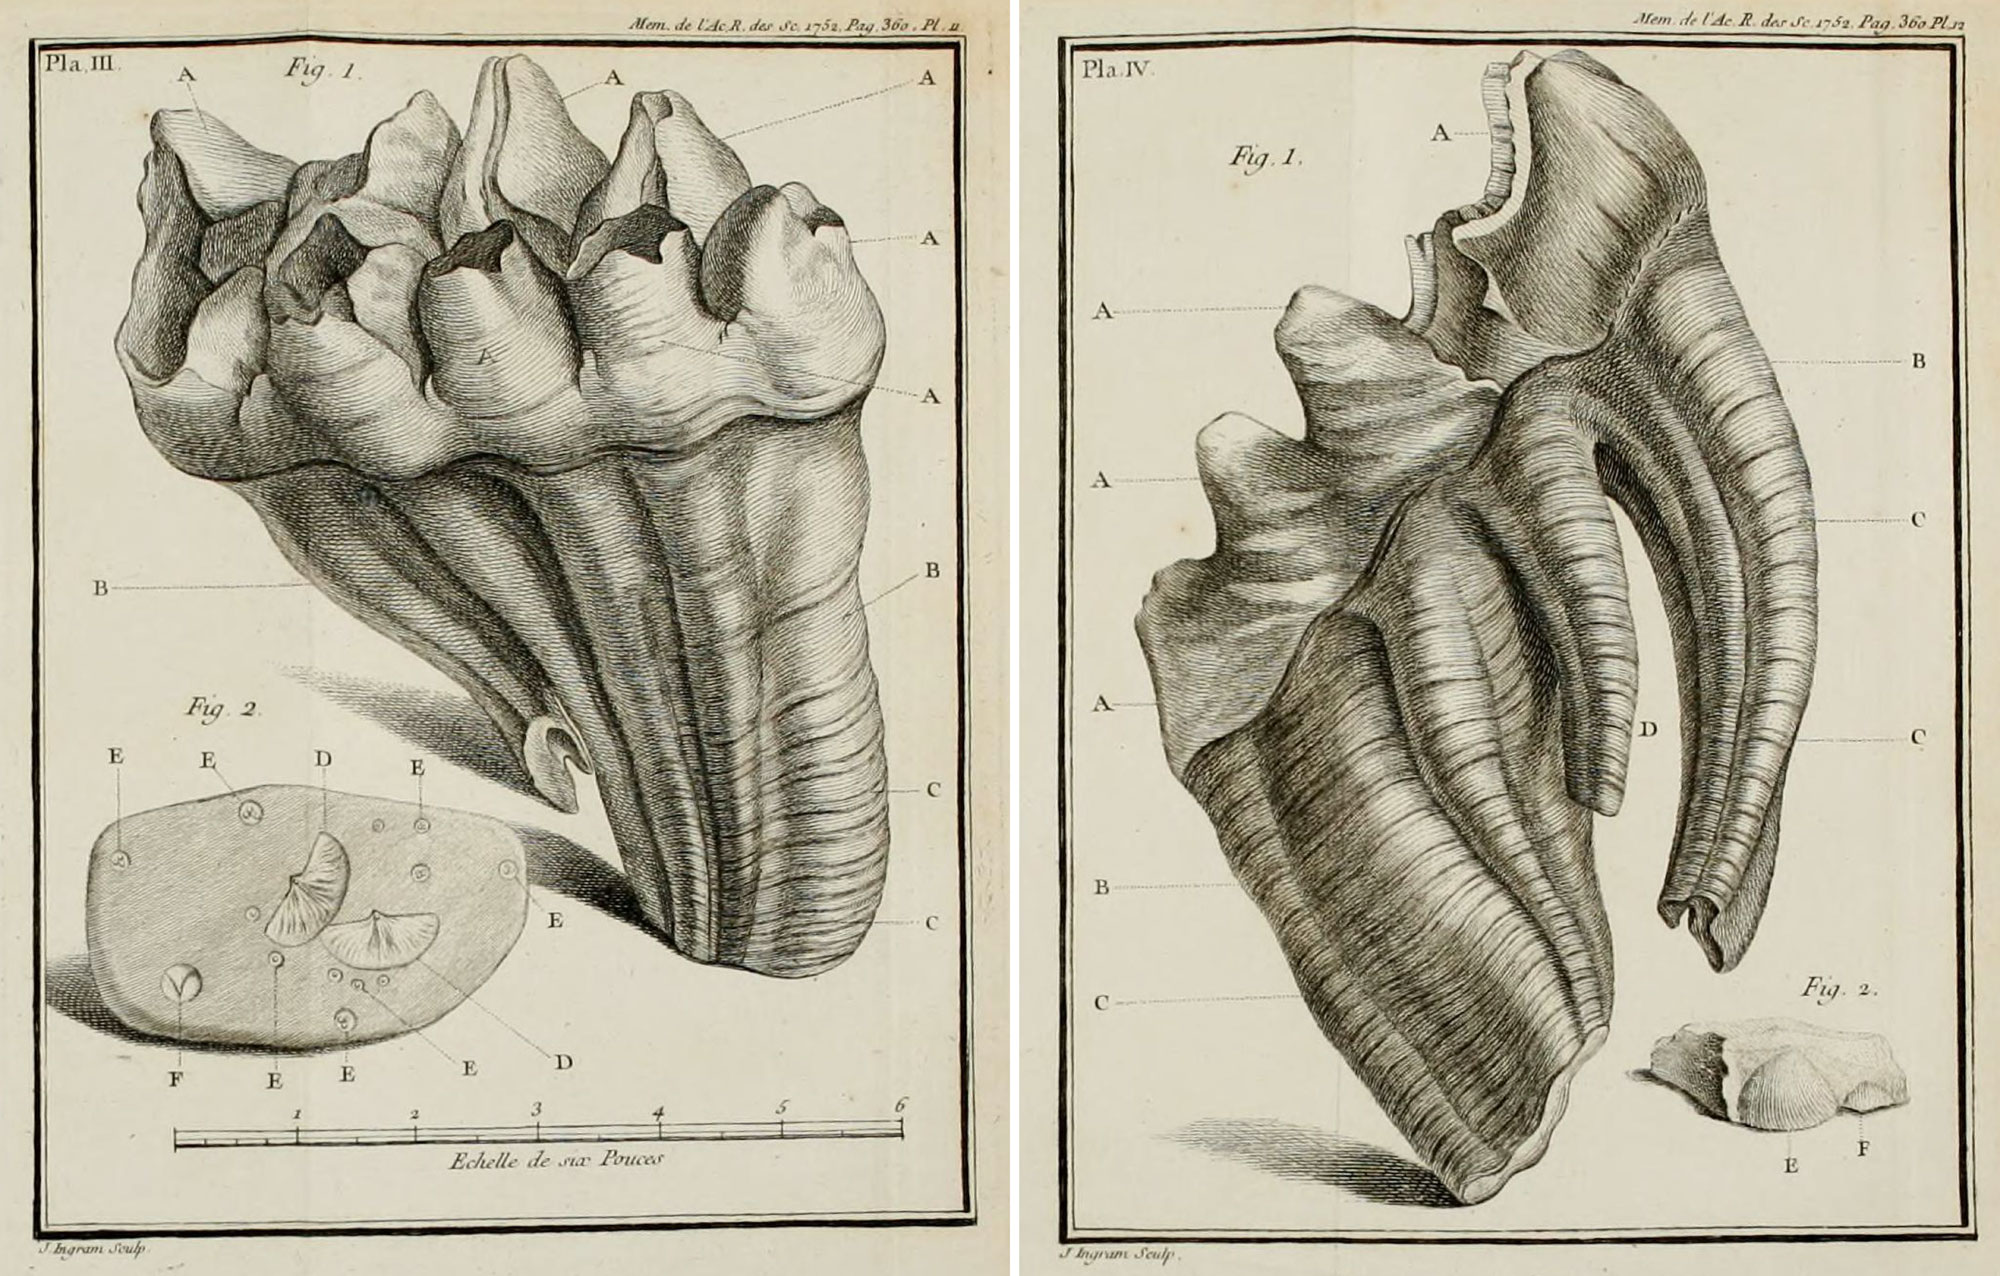 2-Panel figure showing two plates illustrating a mastodon molar from Big Bone Lick. The plates were published in 1756.